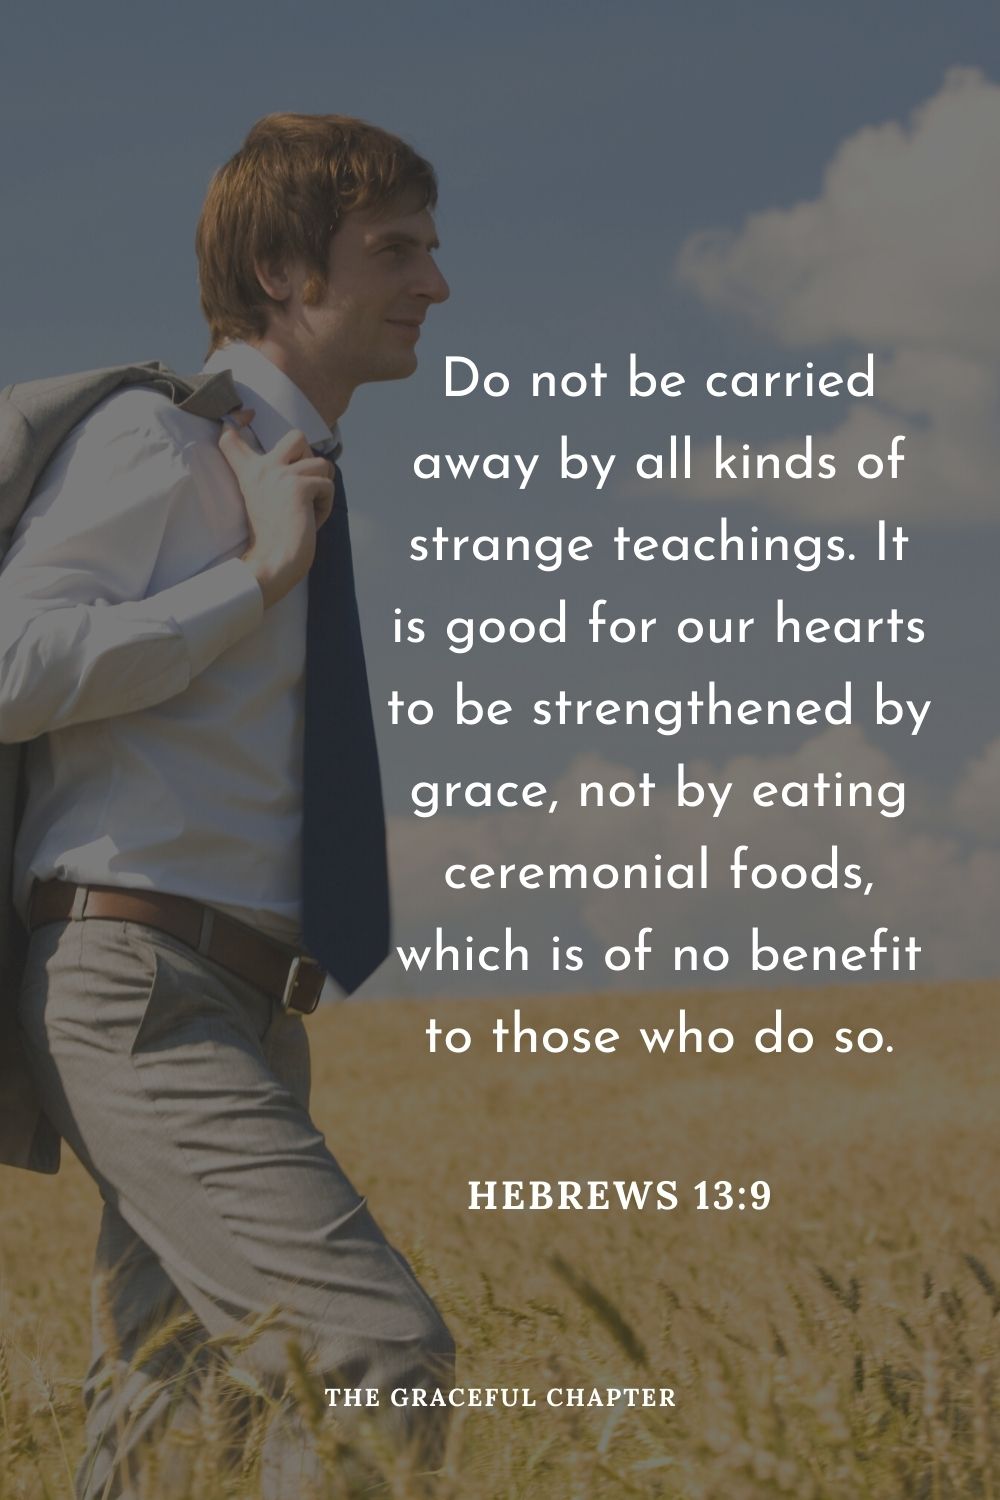 Do not be carried away by all kinds of strange teachings. It is good for our hearts to be strengthened by grace, not by eating ceremonial foods, which is of no benefit to those who do so.